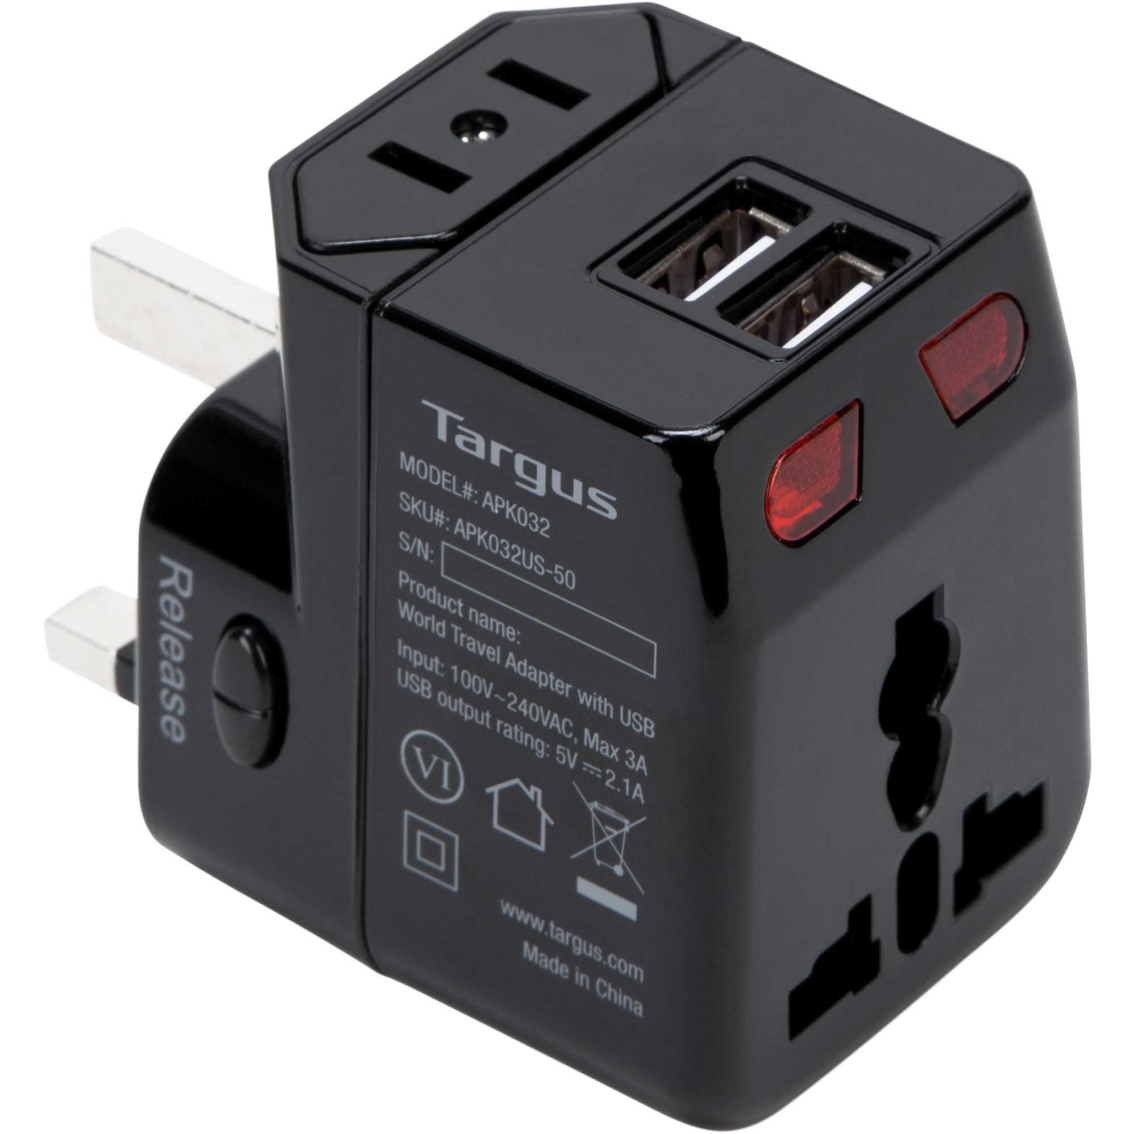 Targus World Travel Power Adapter with Dual USB Charging Ports - Image 1 of 10